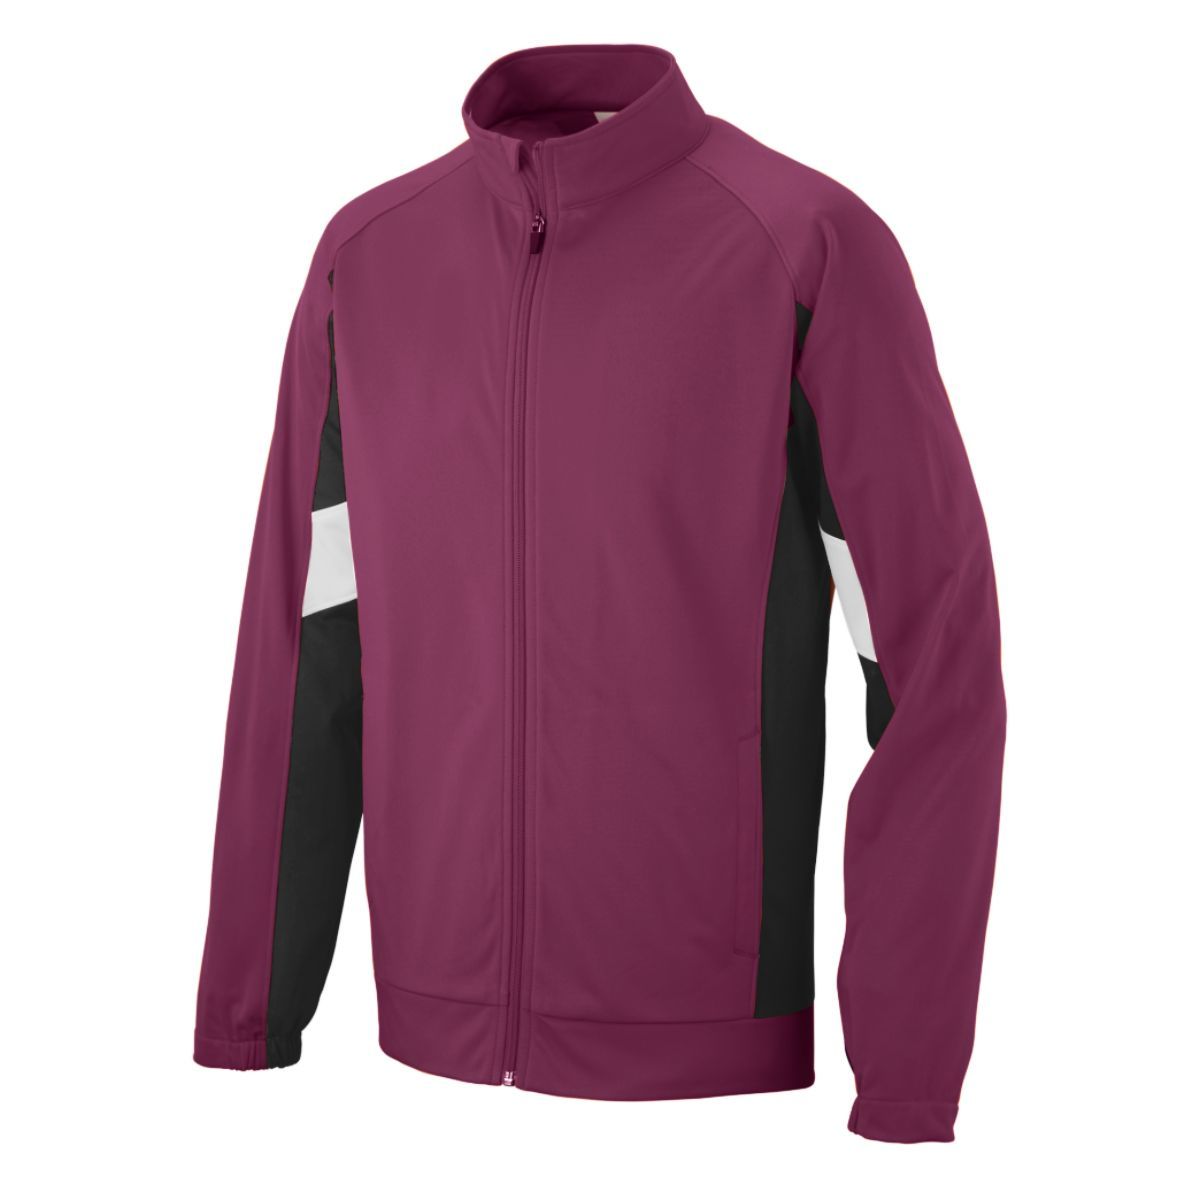 Augusta Sportswear Tour De Force Jacket in Maroon/Black/White  -Part of the Adult, Adult-Jacket, Augusta-Products, Outerwear product lines at KanaleyCreations.com